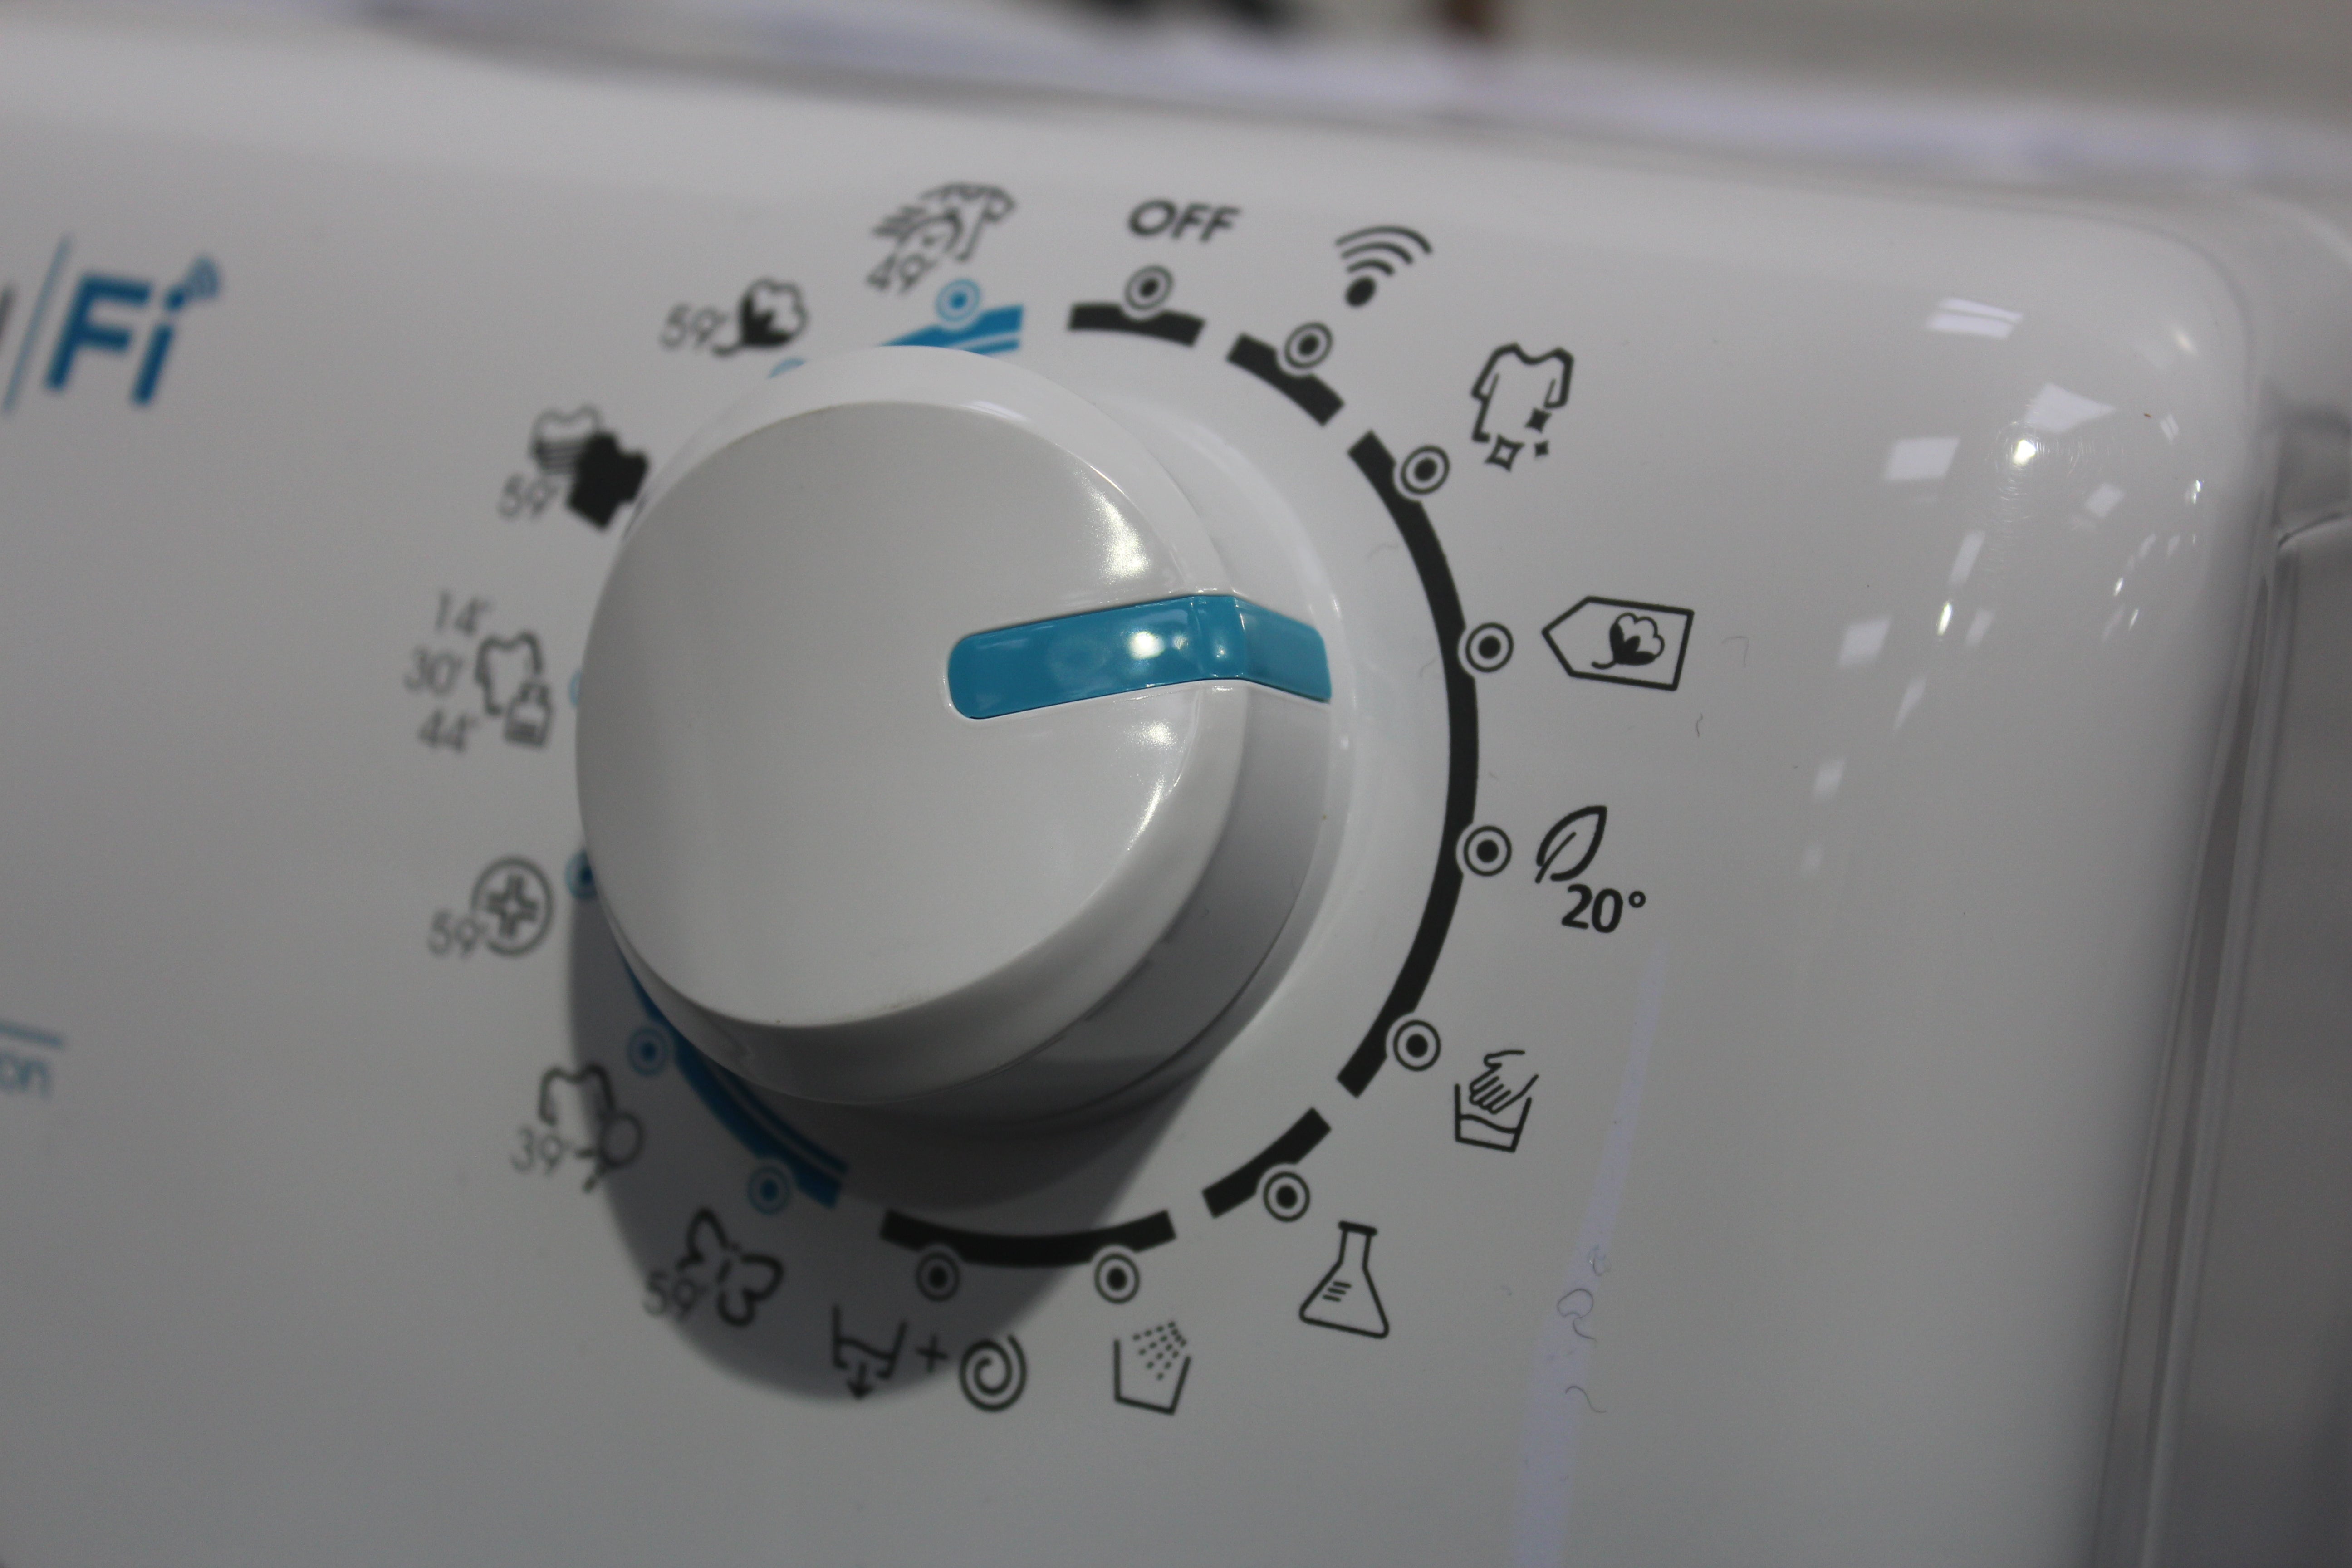 Close up picture of a rotating knob on a white Candy Smart Pro washing machine